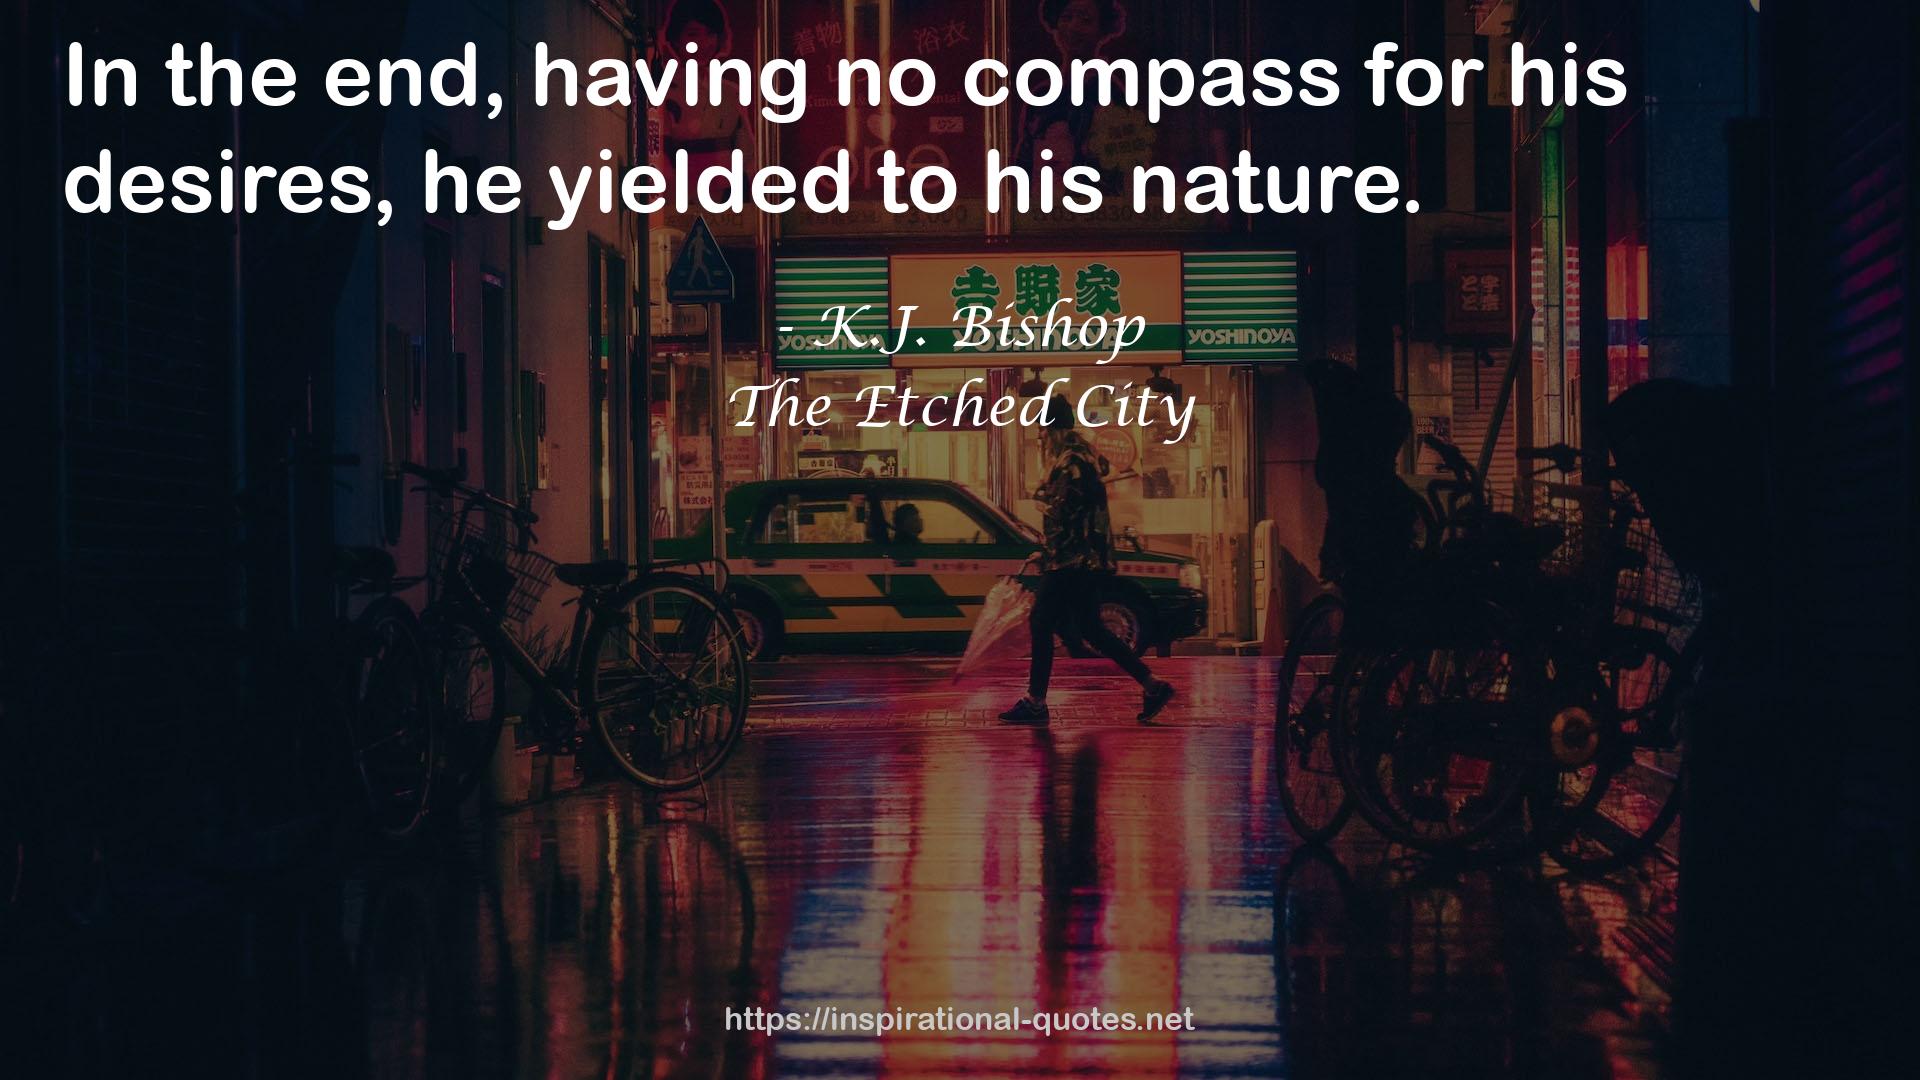 The Etched City QUOTES